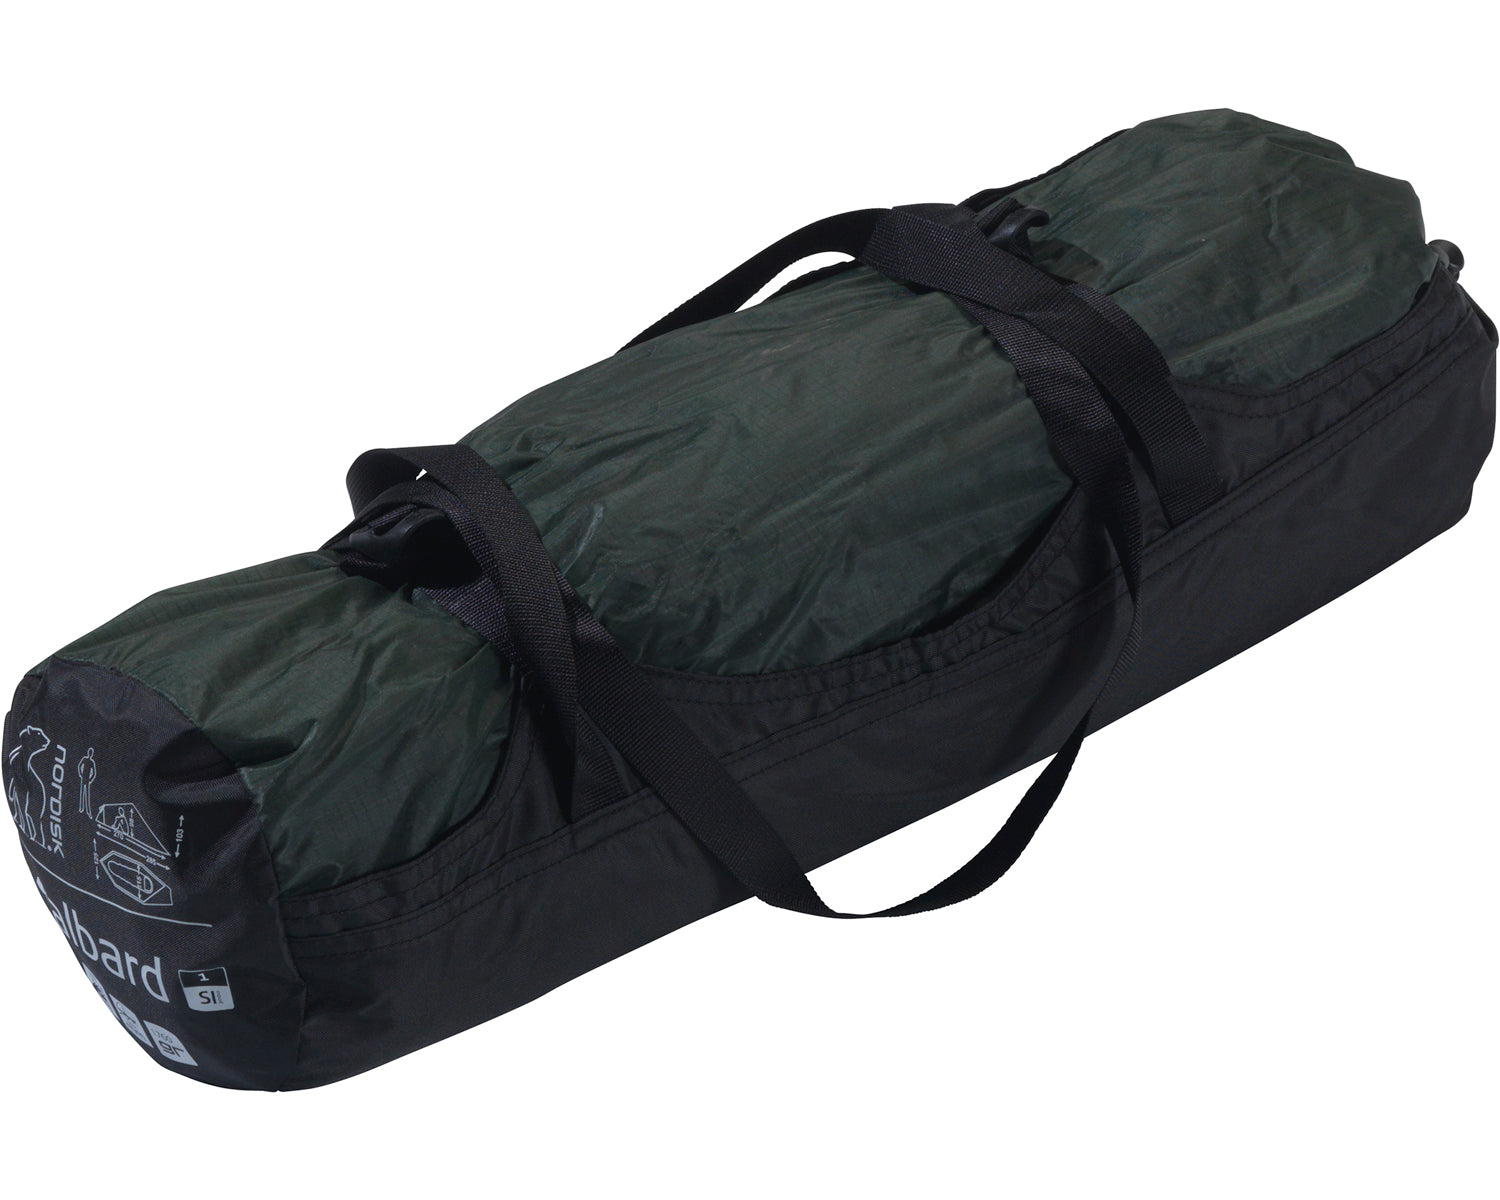 Svalbard 1 SI tent - 2 person - Forest Green